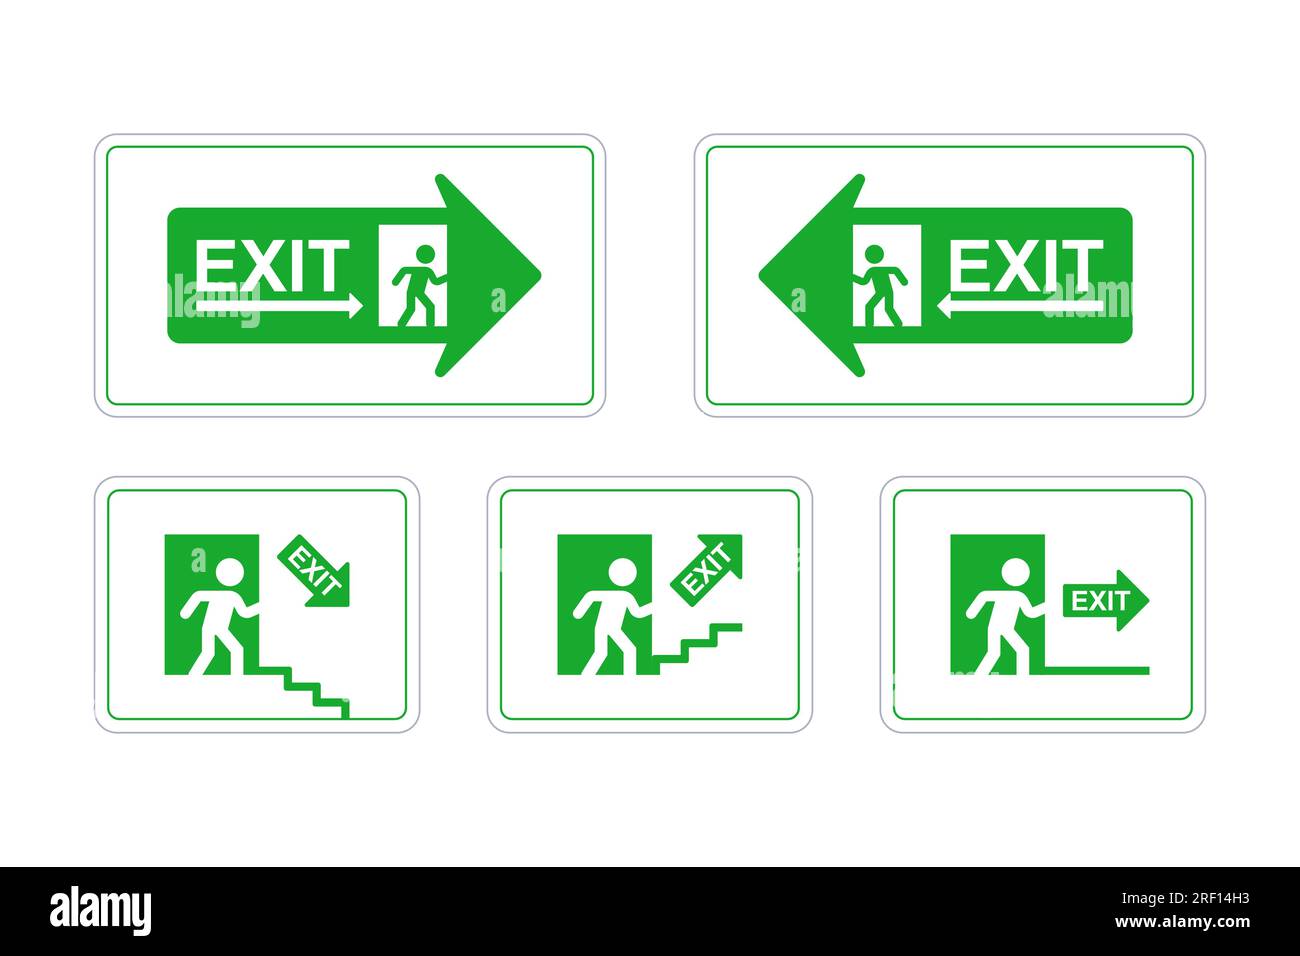 Signs Of Direction During Evacuation Emergency Exit Running Man To The Door Flat Vector Set 1598